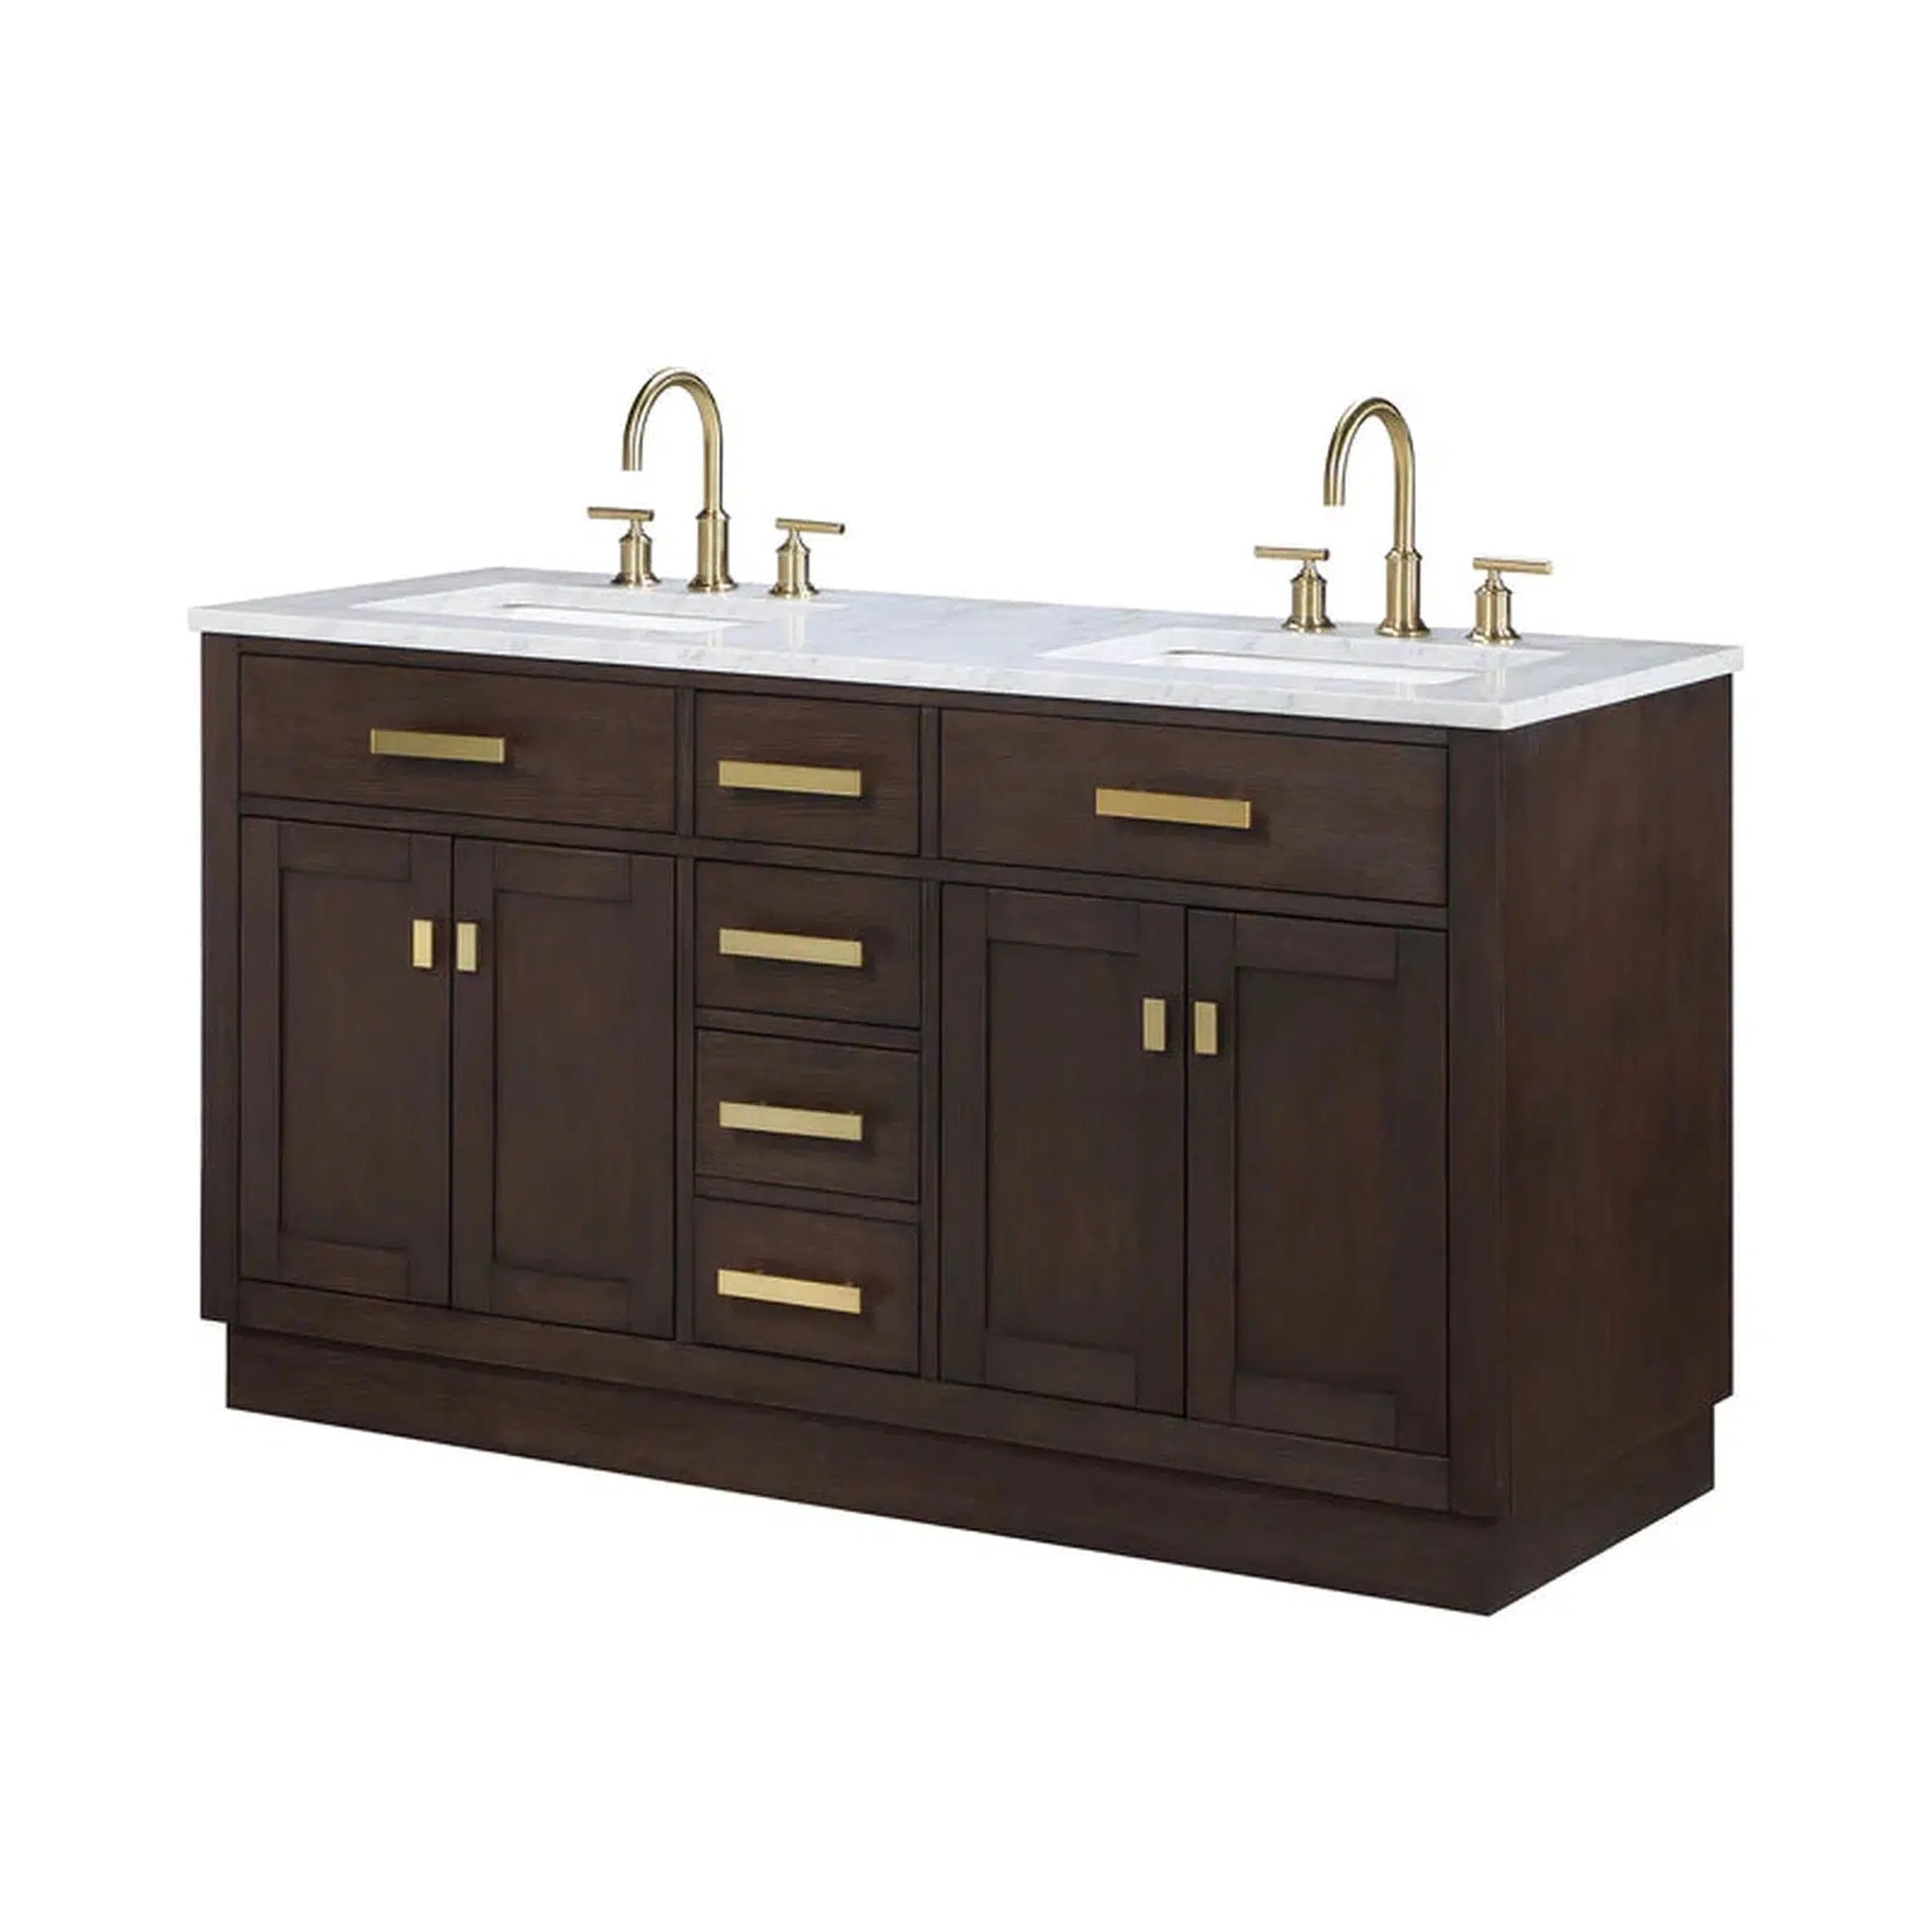 Water Creation Chestnut 60" Double Sink Carrara White Marble Countertop Vanity In Brown Oak with Grooseneck Faucets